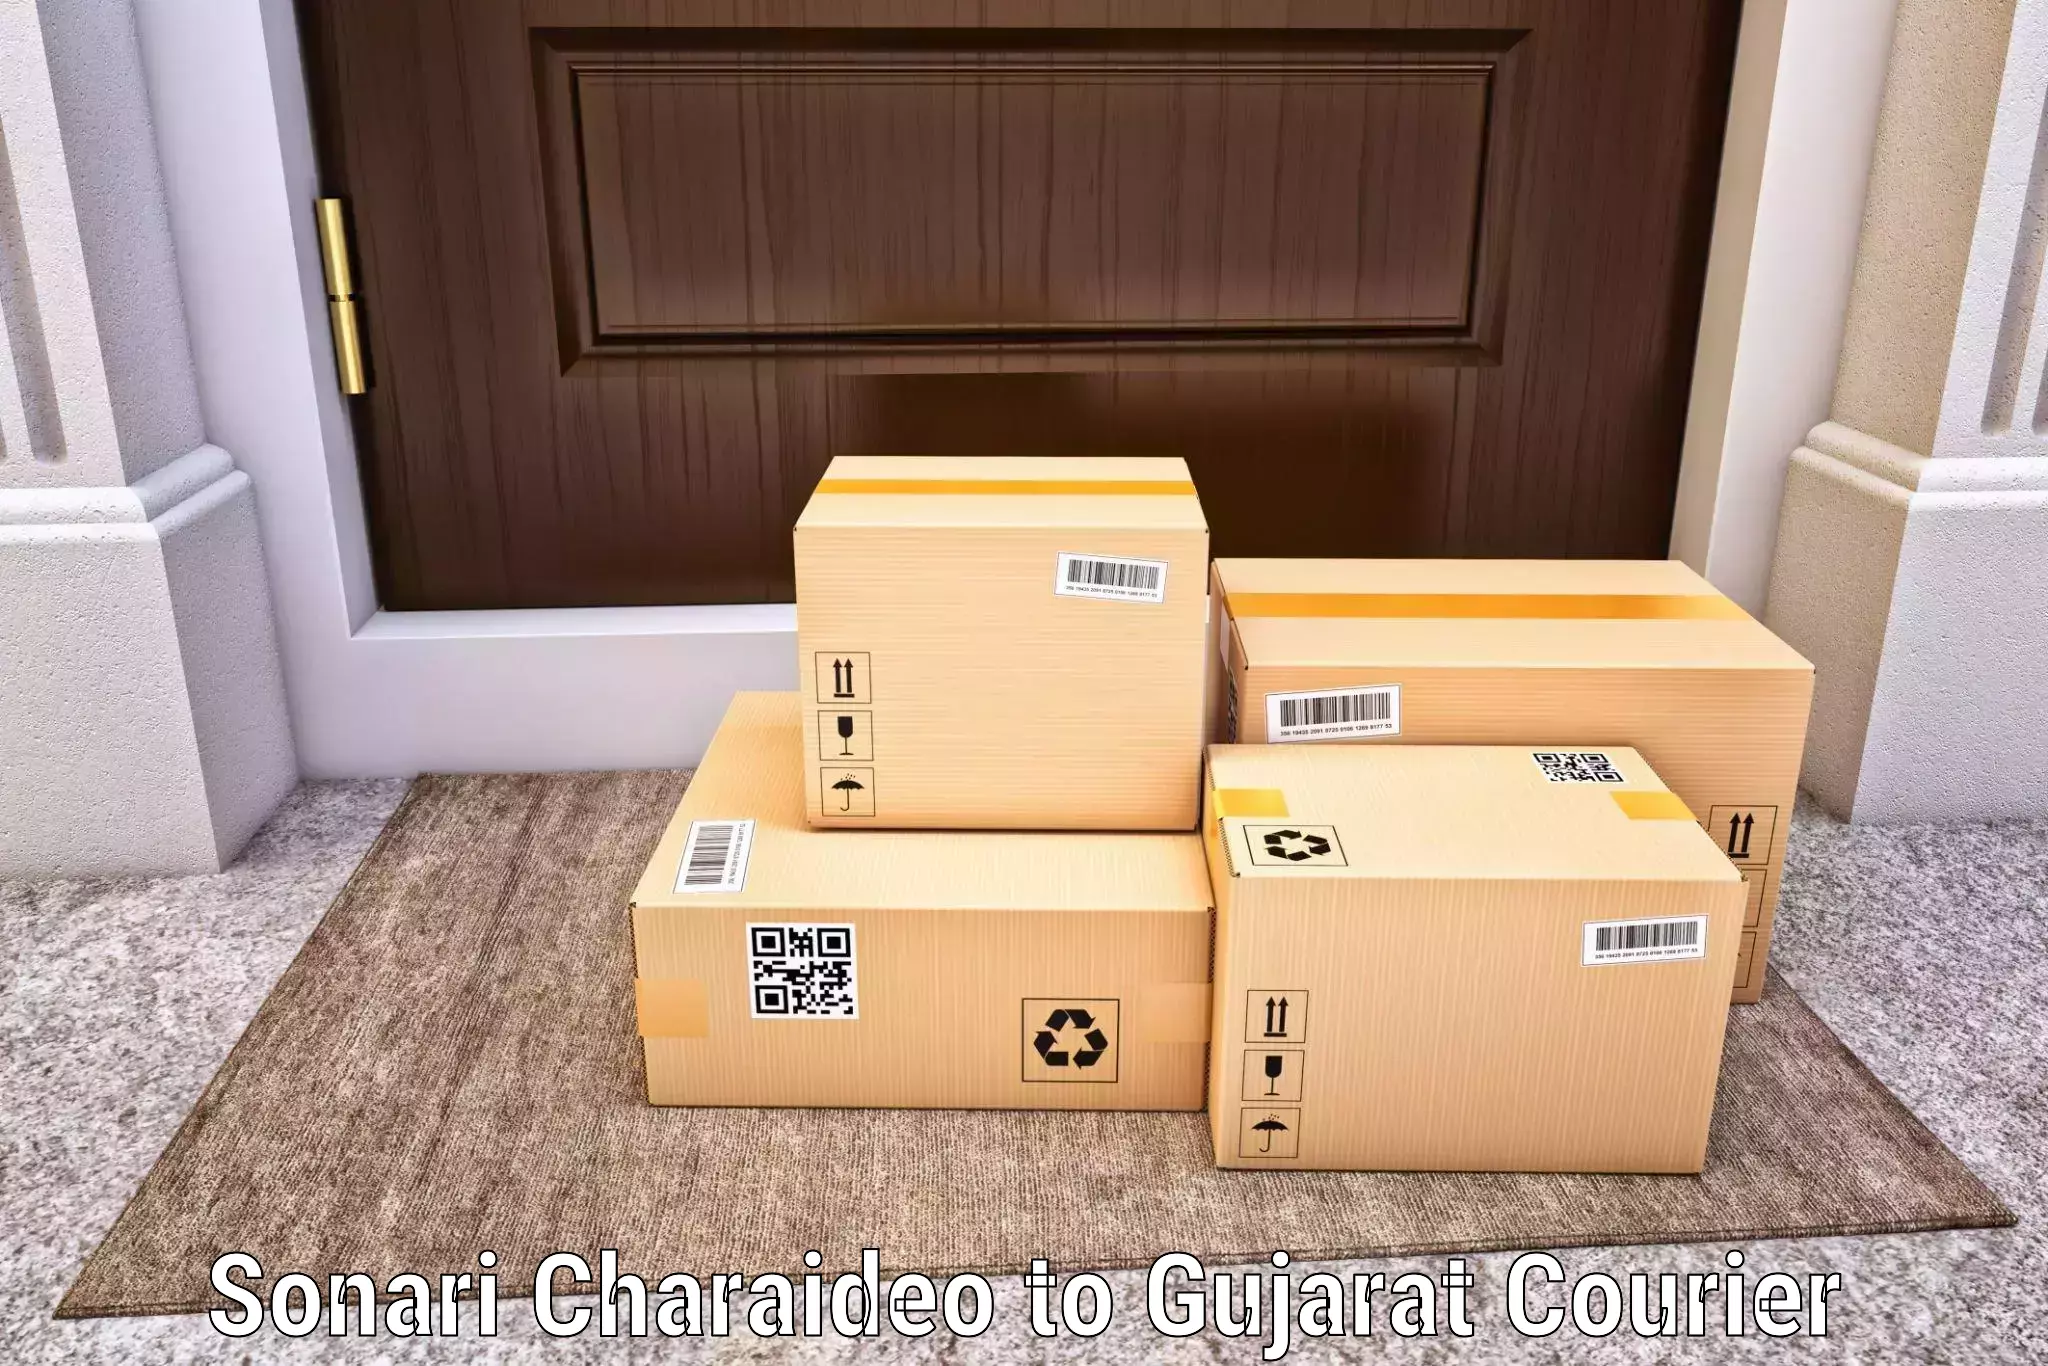 Nationwide courier service Sonari Charaideo to Ahmedabad